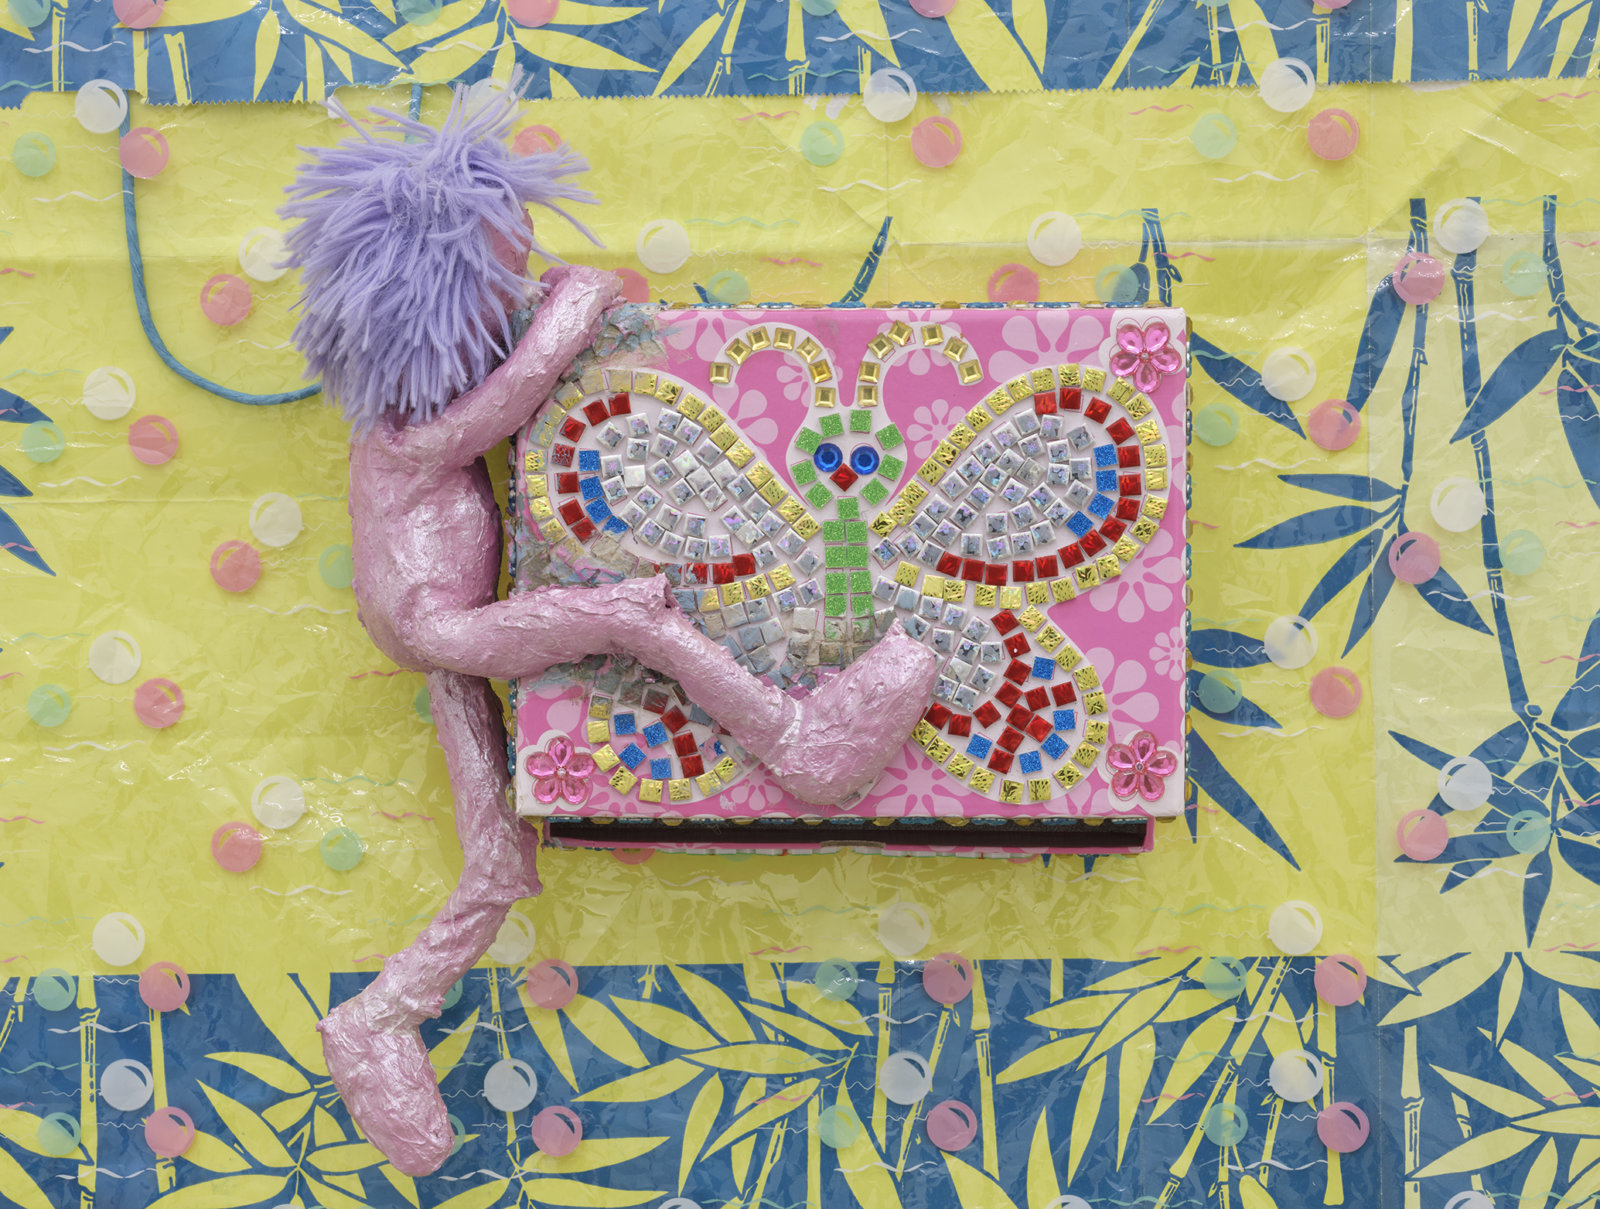 Liz Magor, Butterfly Box (detail), 2020, painted doll, jewellery box, packaging materials, 47 x 45 x 5 in. (119 x 114 x 13 cm)